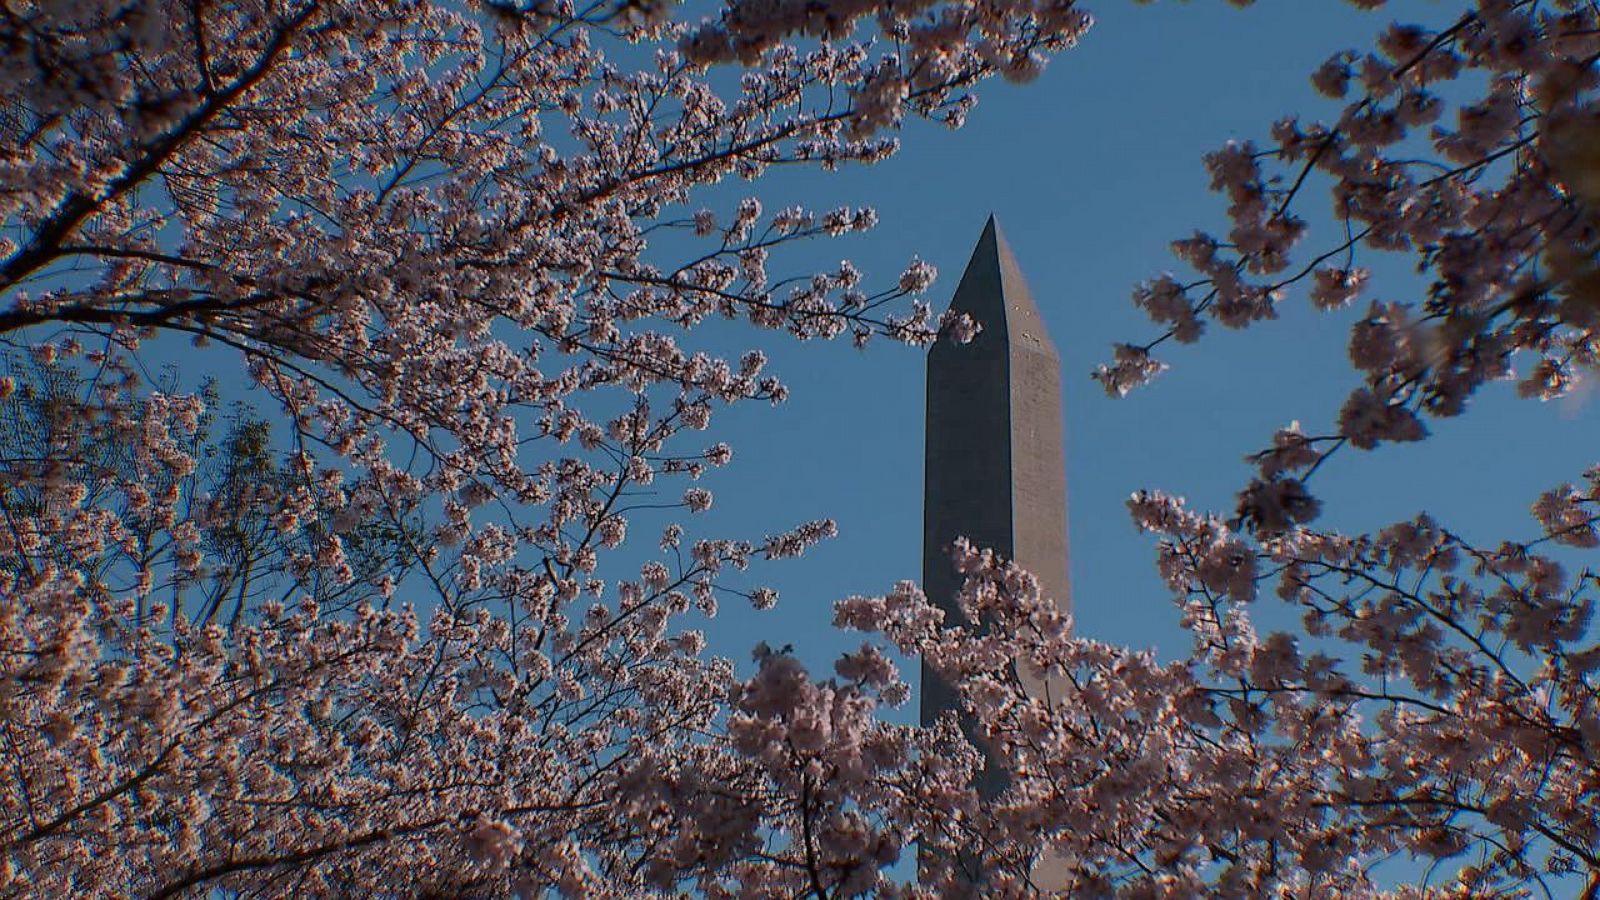 MLB on X: The D.C. Cherry Blossoms have arrived early this year